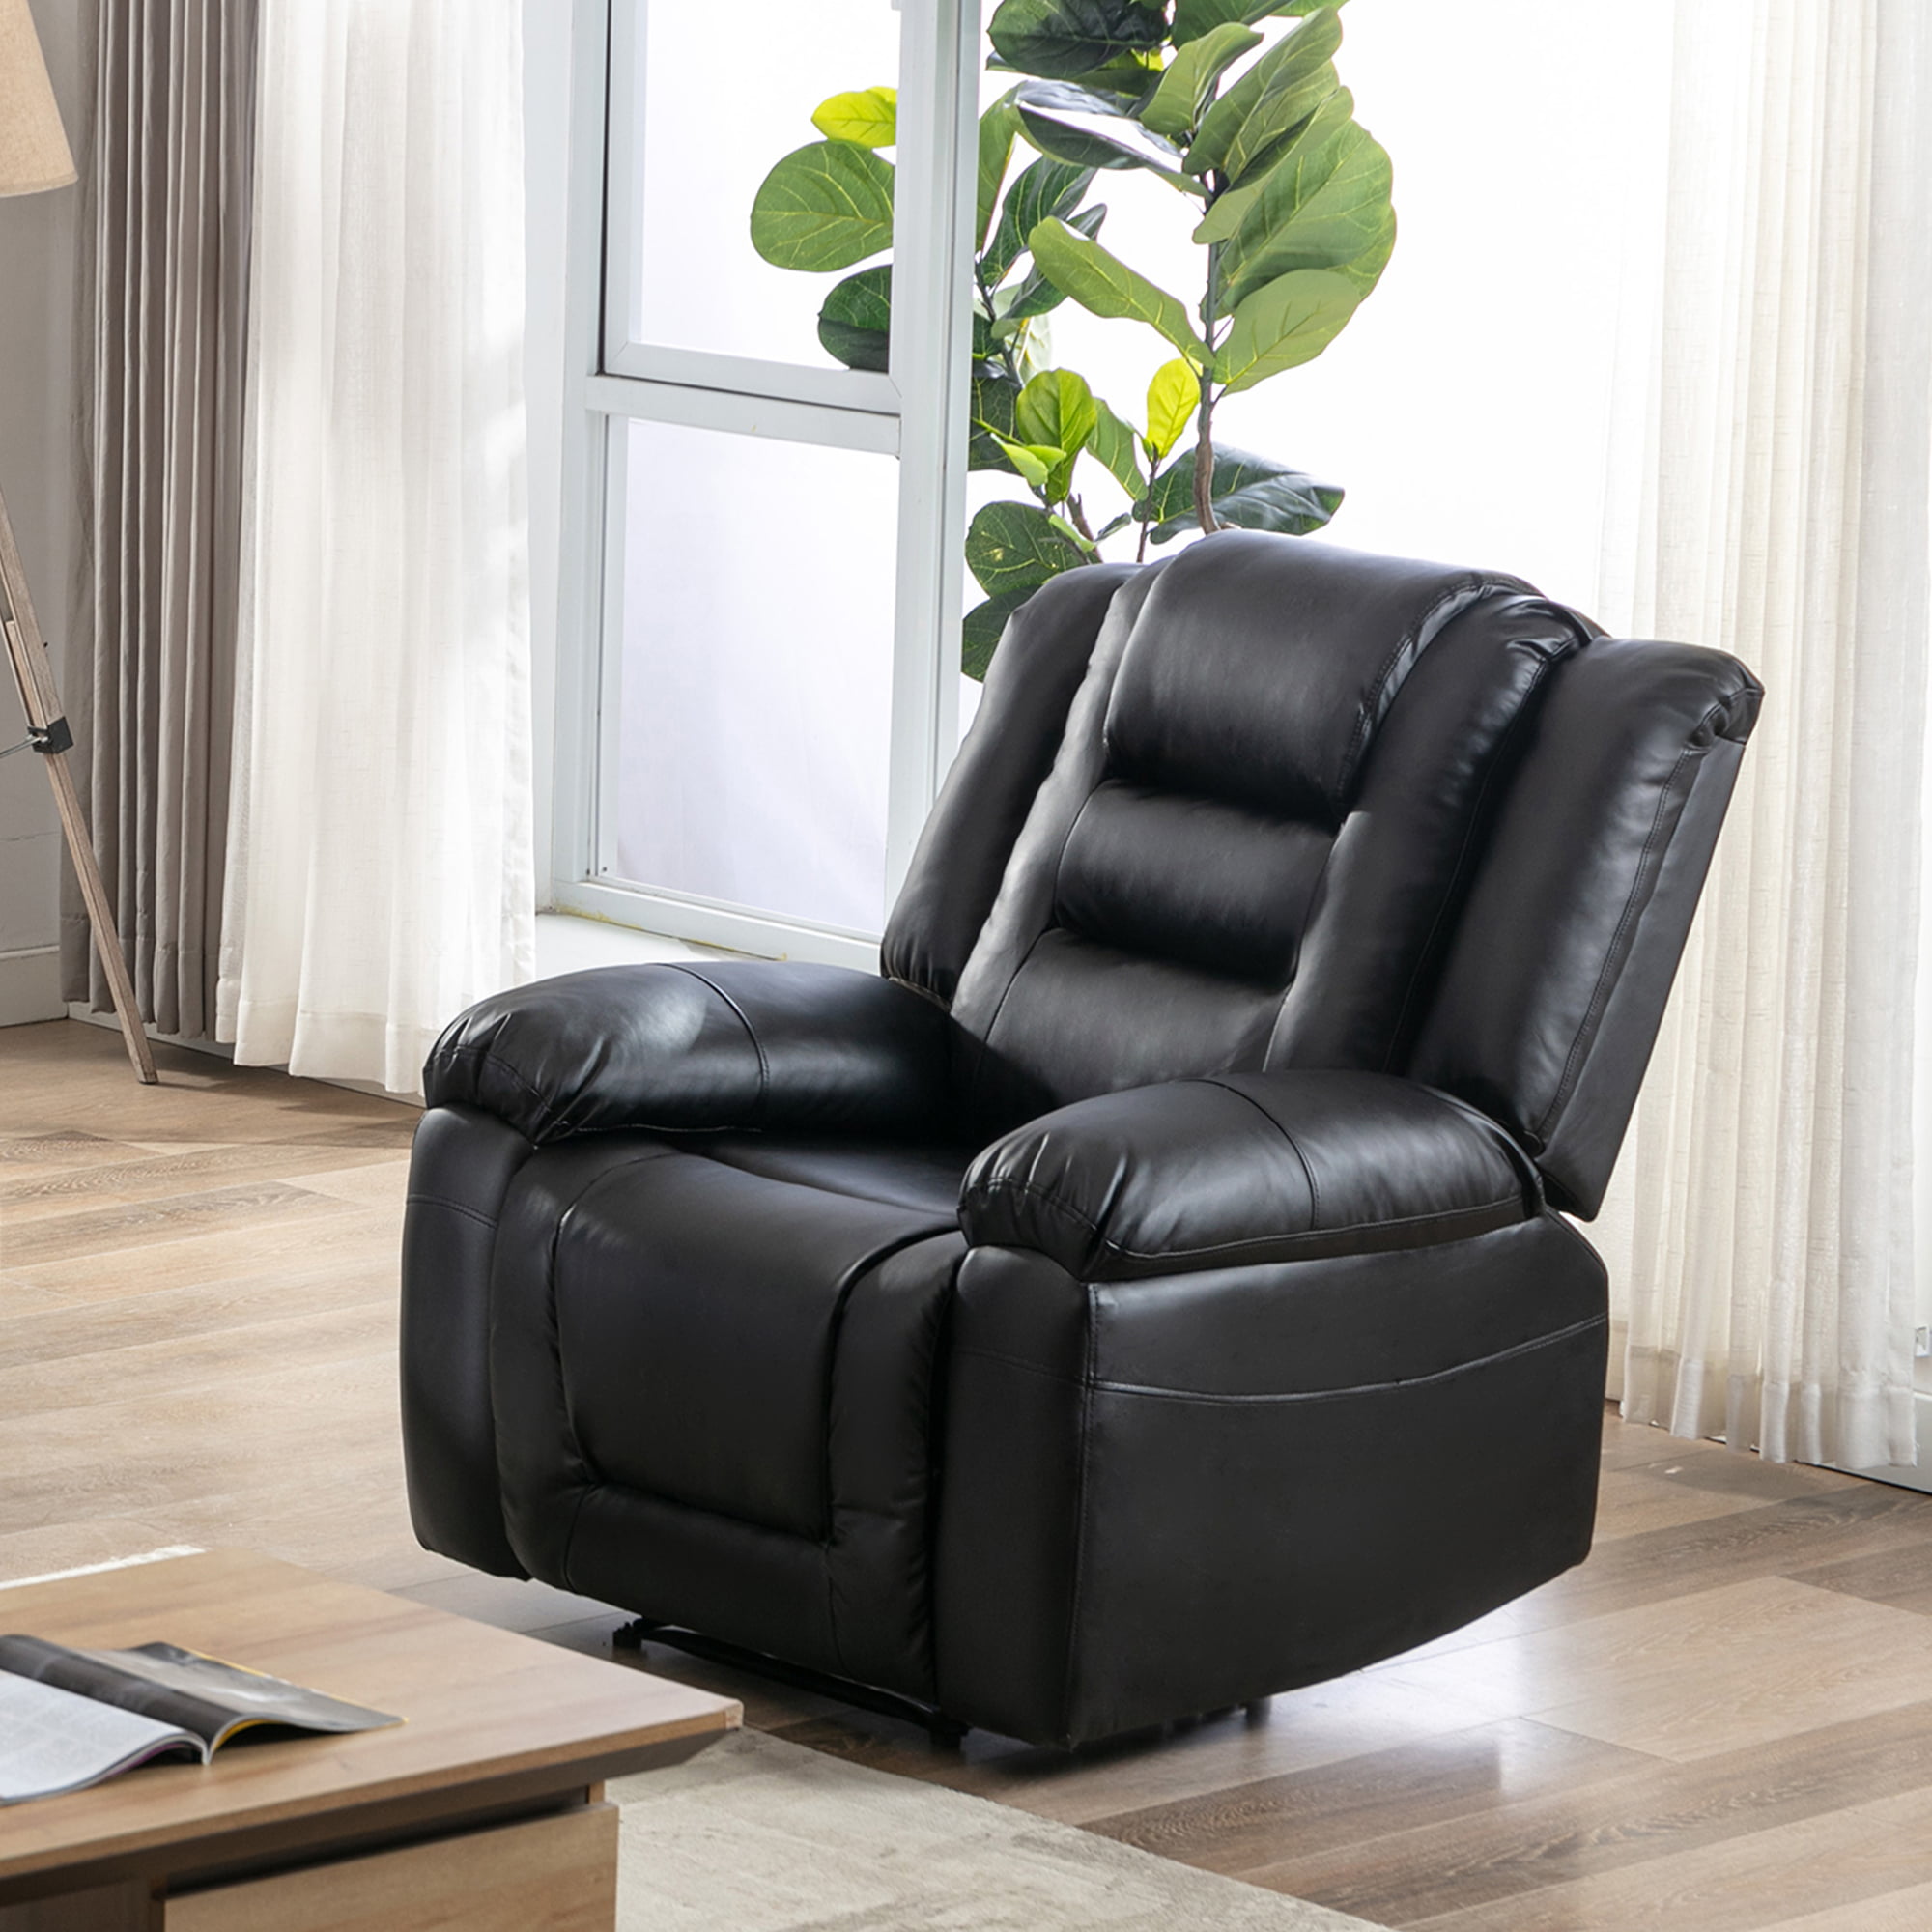 Furmax Power Lift Recliner Chair for Elderly, PU Leather Modern Single  Reclining Sofa, Ergonomic Lounge Padded Armchair Home Theater Seat with  Lumbar